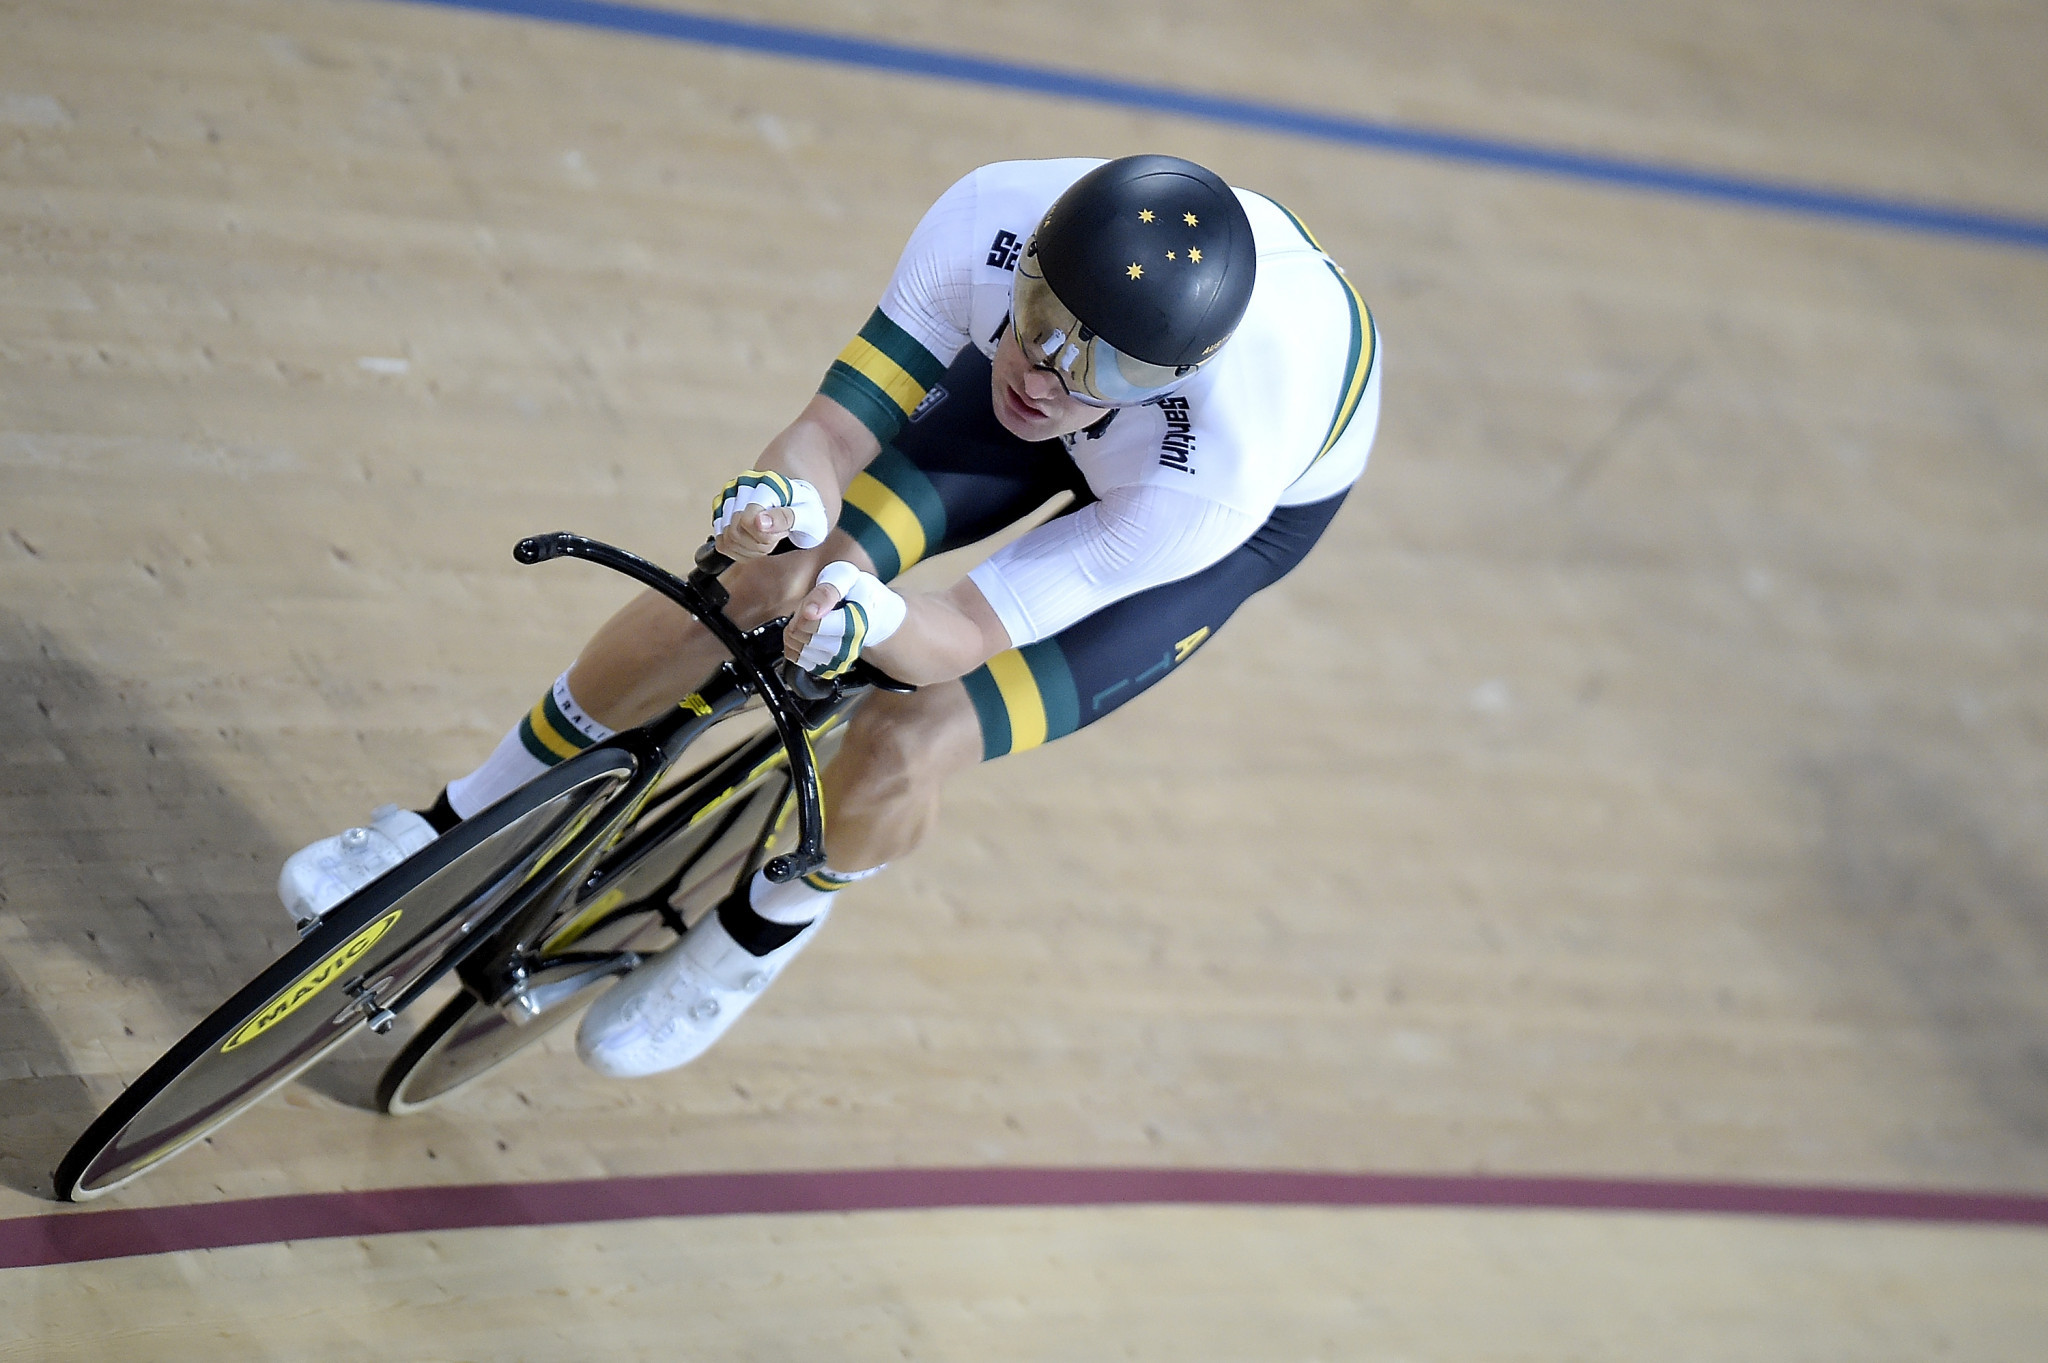 Australia's David Nicholas won his second gold today in the C3 scratch final ©Getty Images